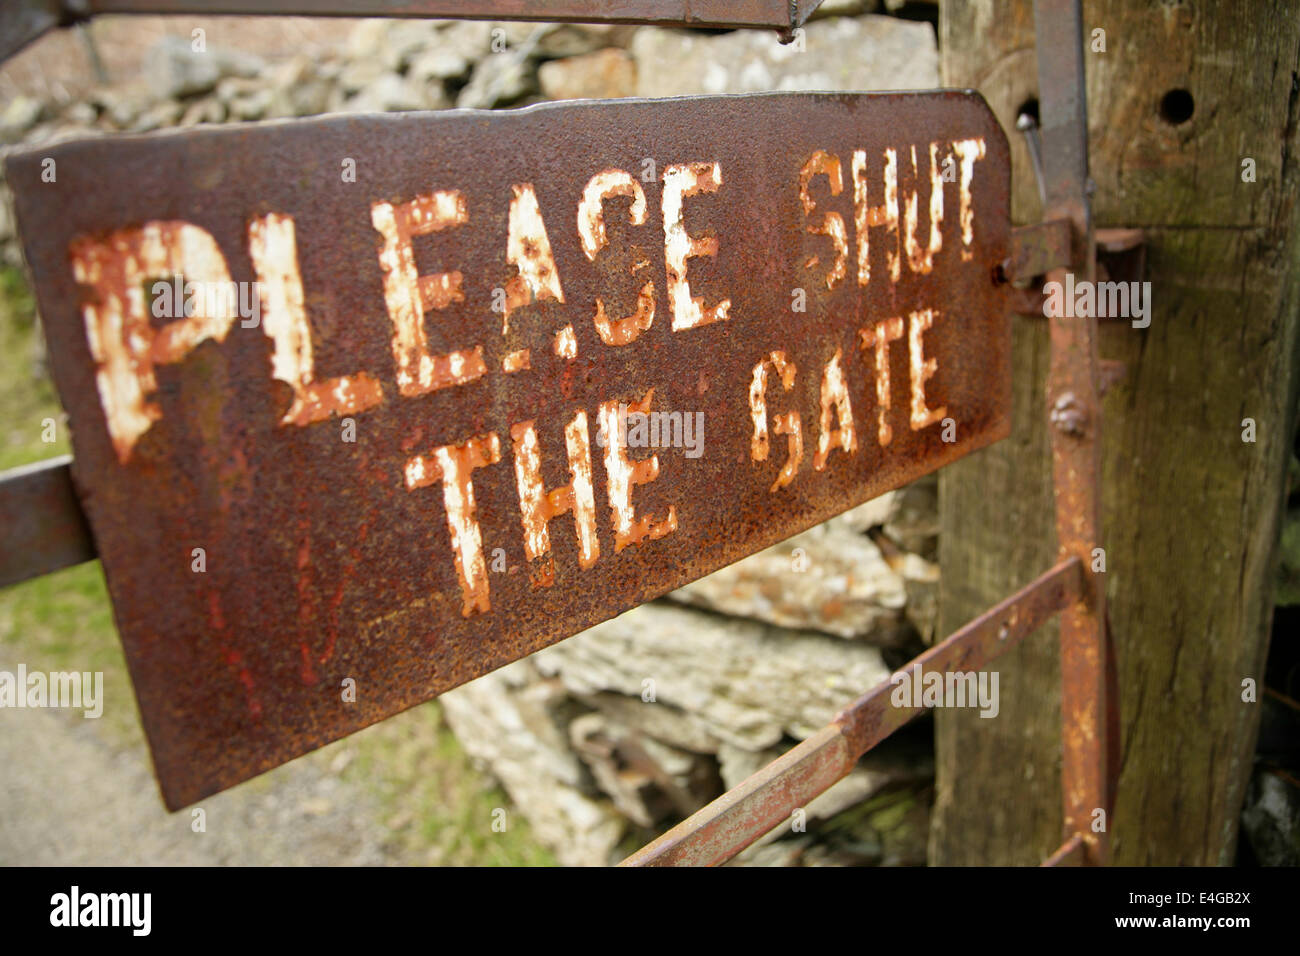 'Please Shut the Gate' sign on rusty metal gate, Snowdonia, Wales. Stock Photo